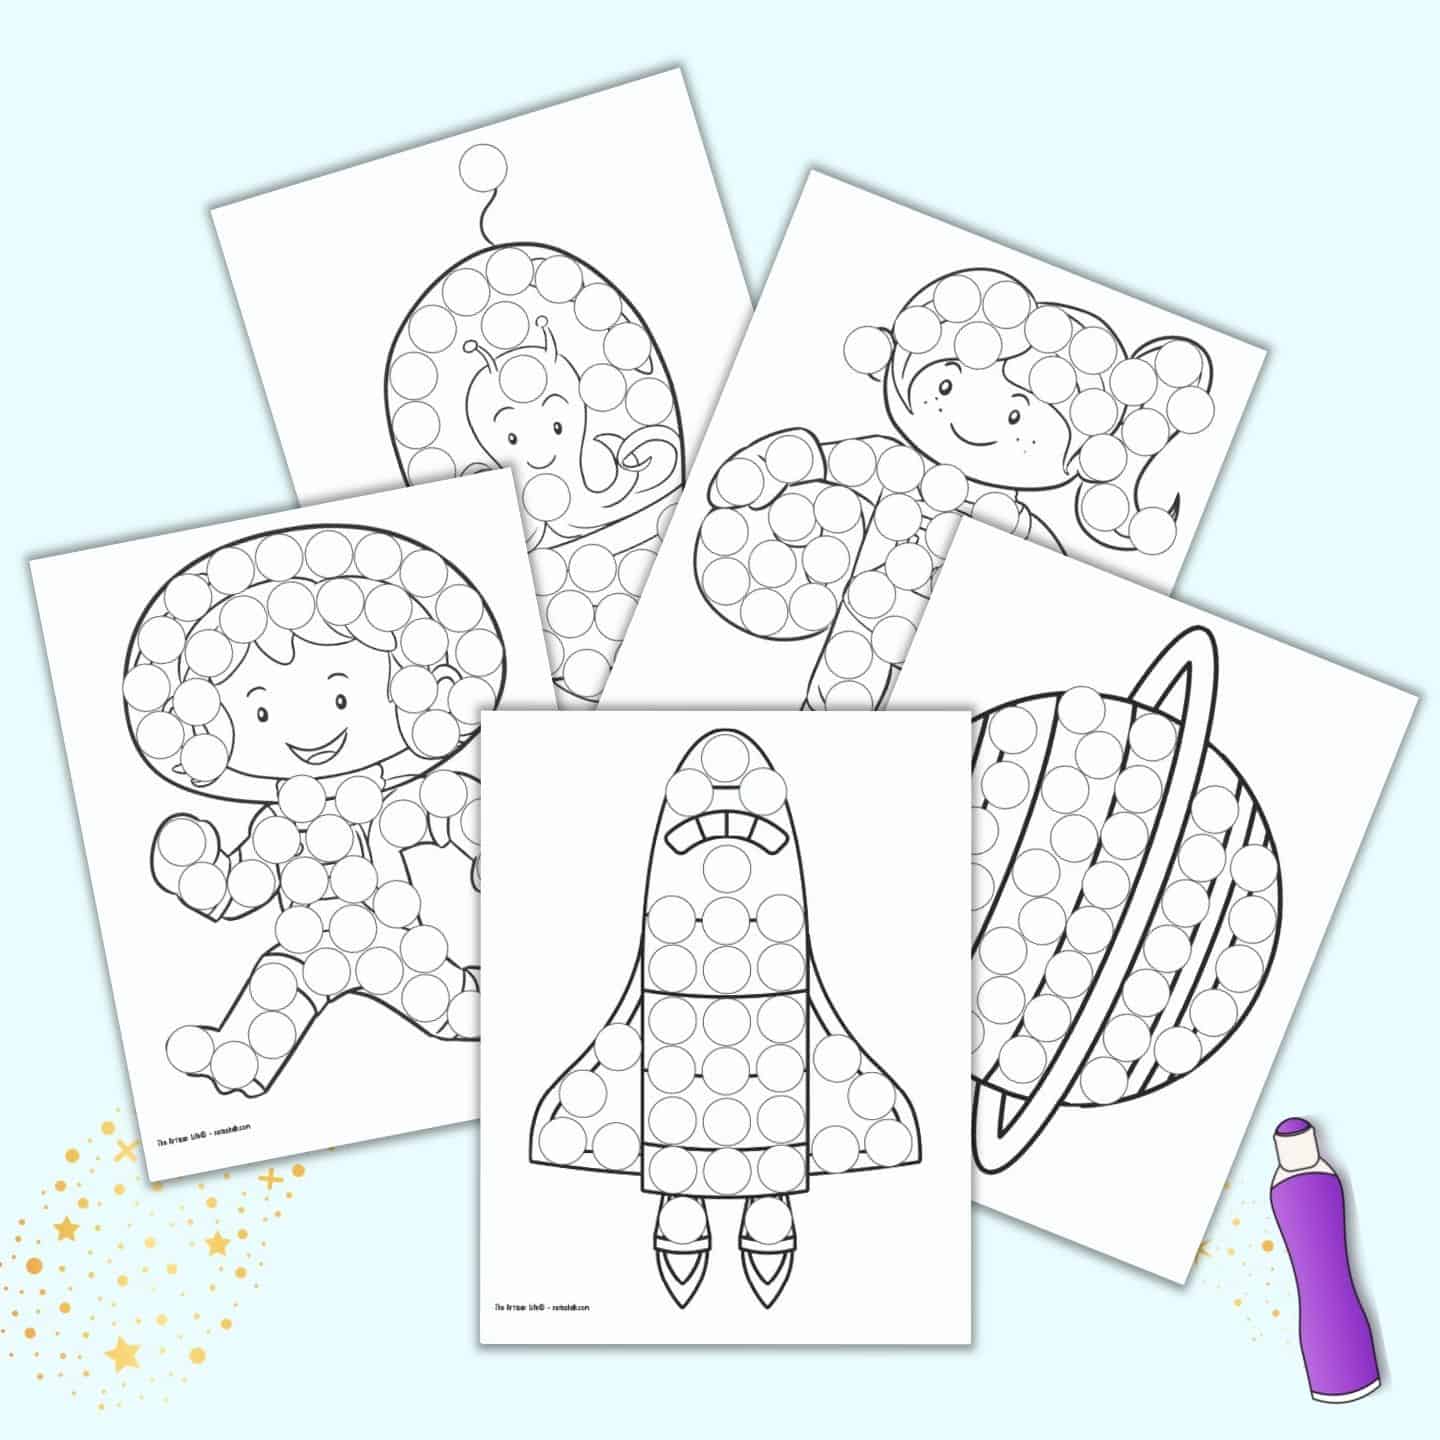 Free Printable Outer Space Dot Marker Coloring Pages   The Artisan ...